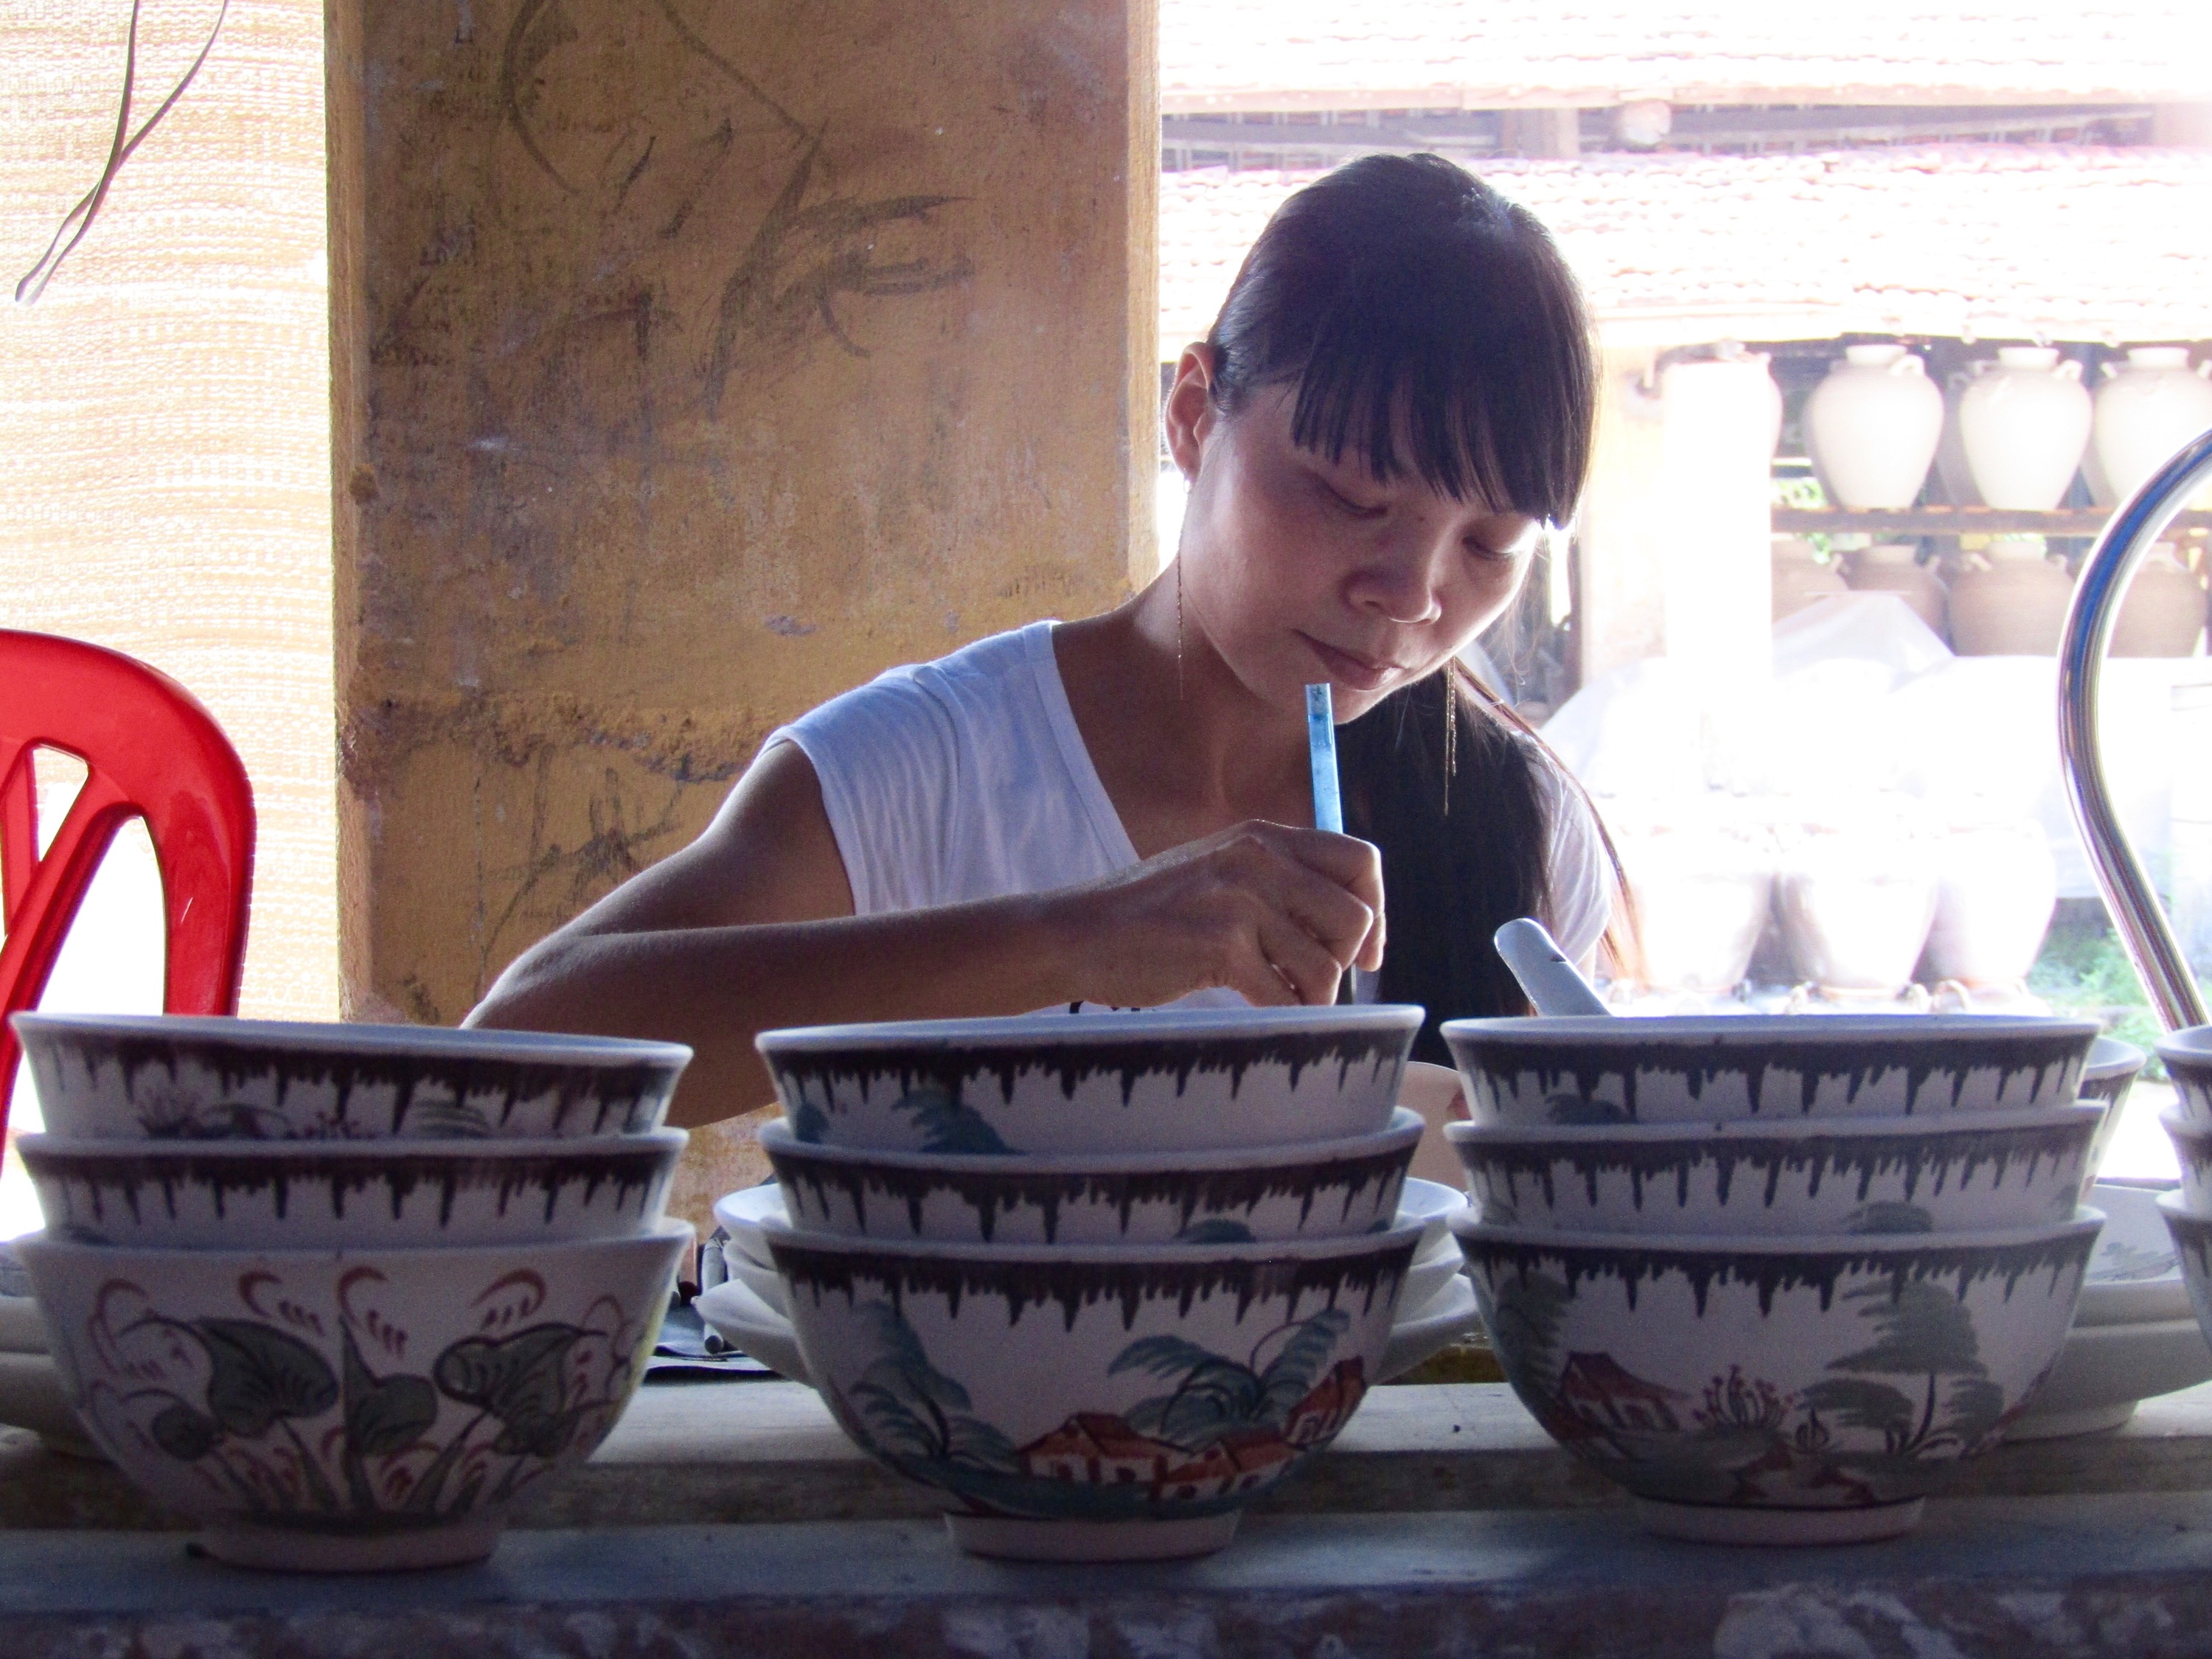 Inside, a woman puts the finishing touches on one of the ceramic bowls. She worked quickly and precisely, creating a unique scene on each piece.